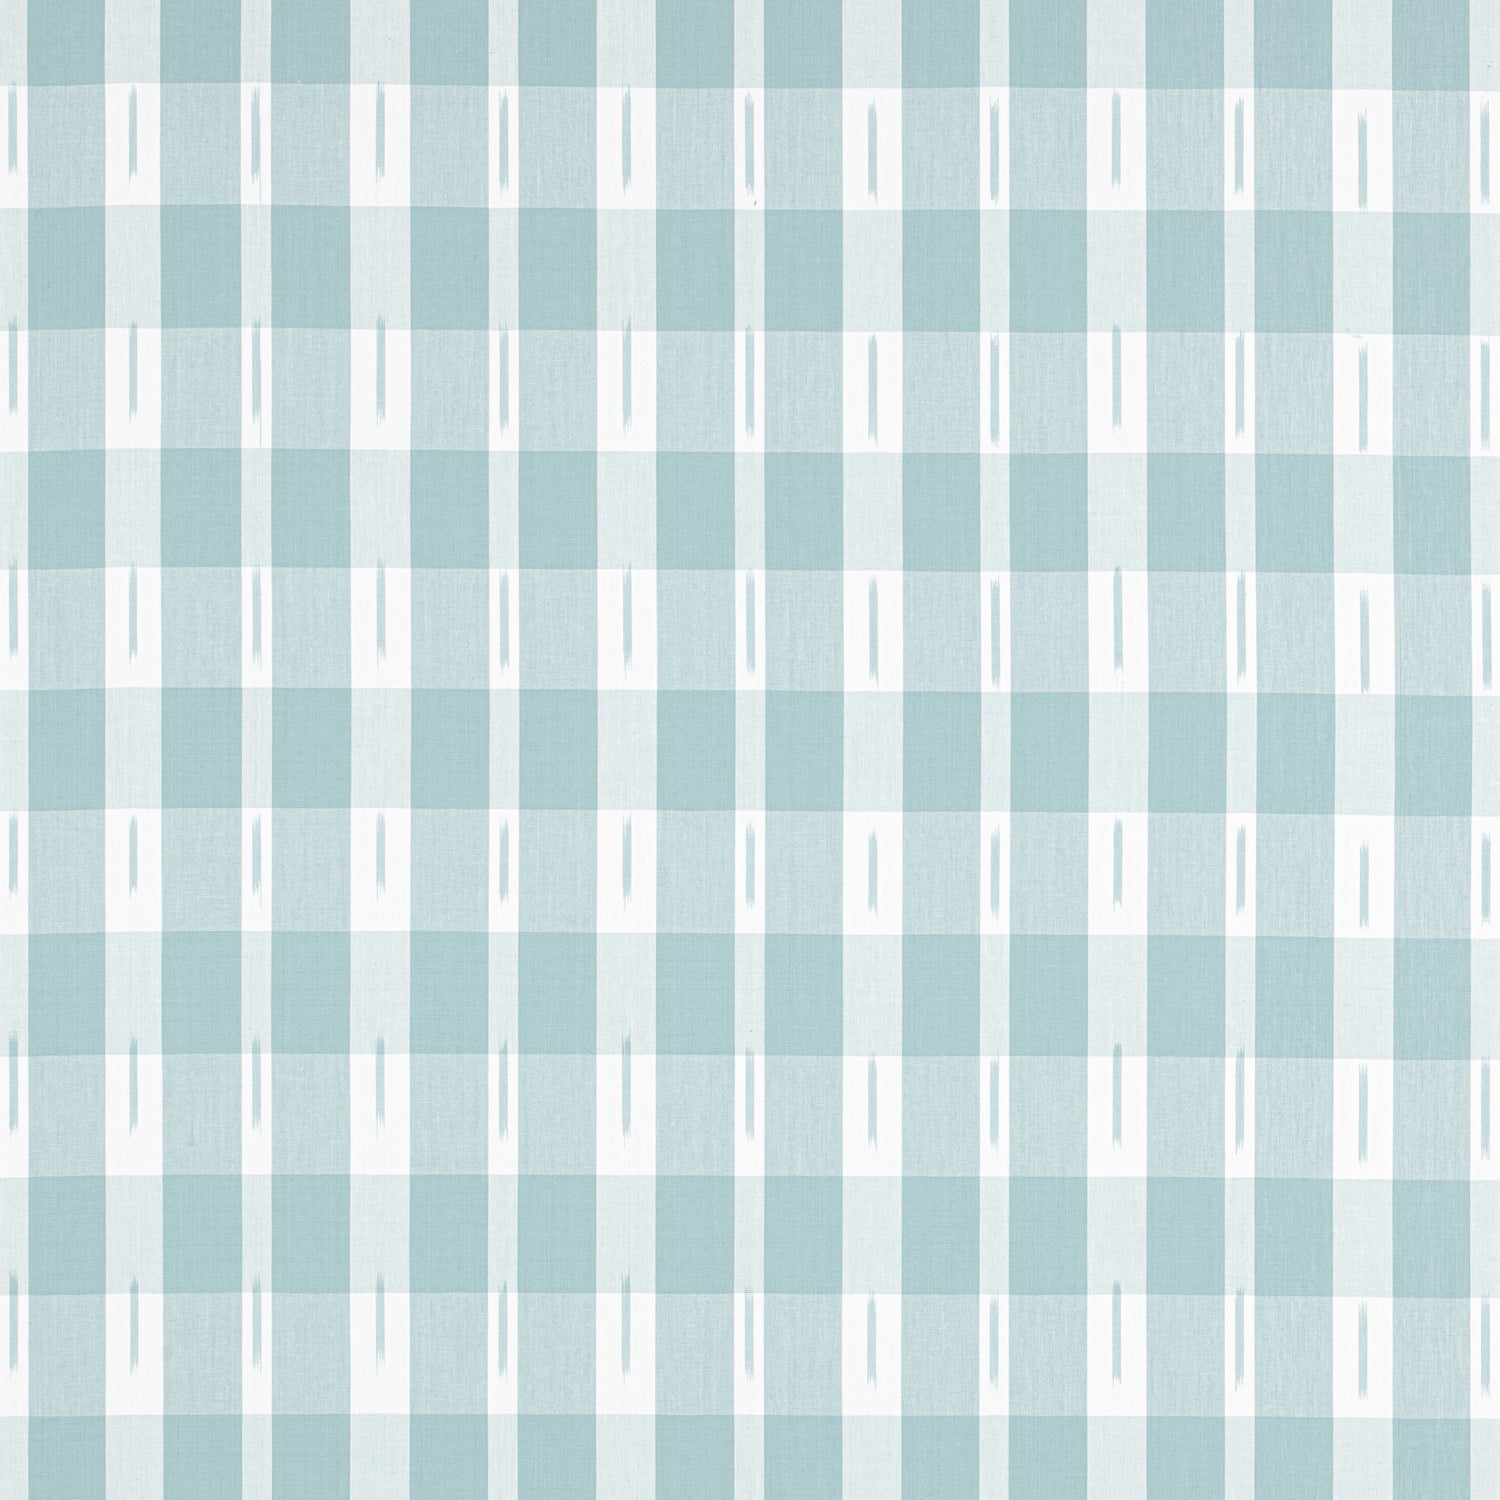 Ellastone Check fabric in seaglass color - pattern number W736438 - by Thibaut in the Indienne collection